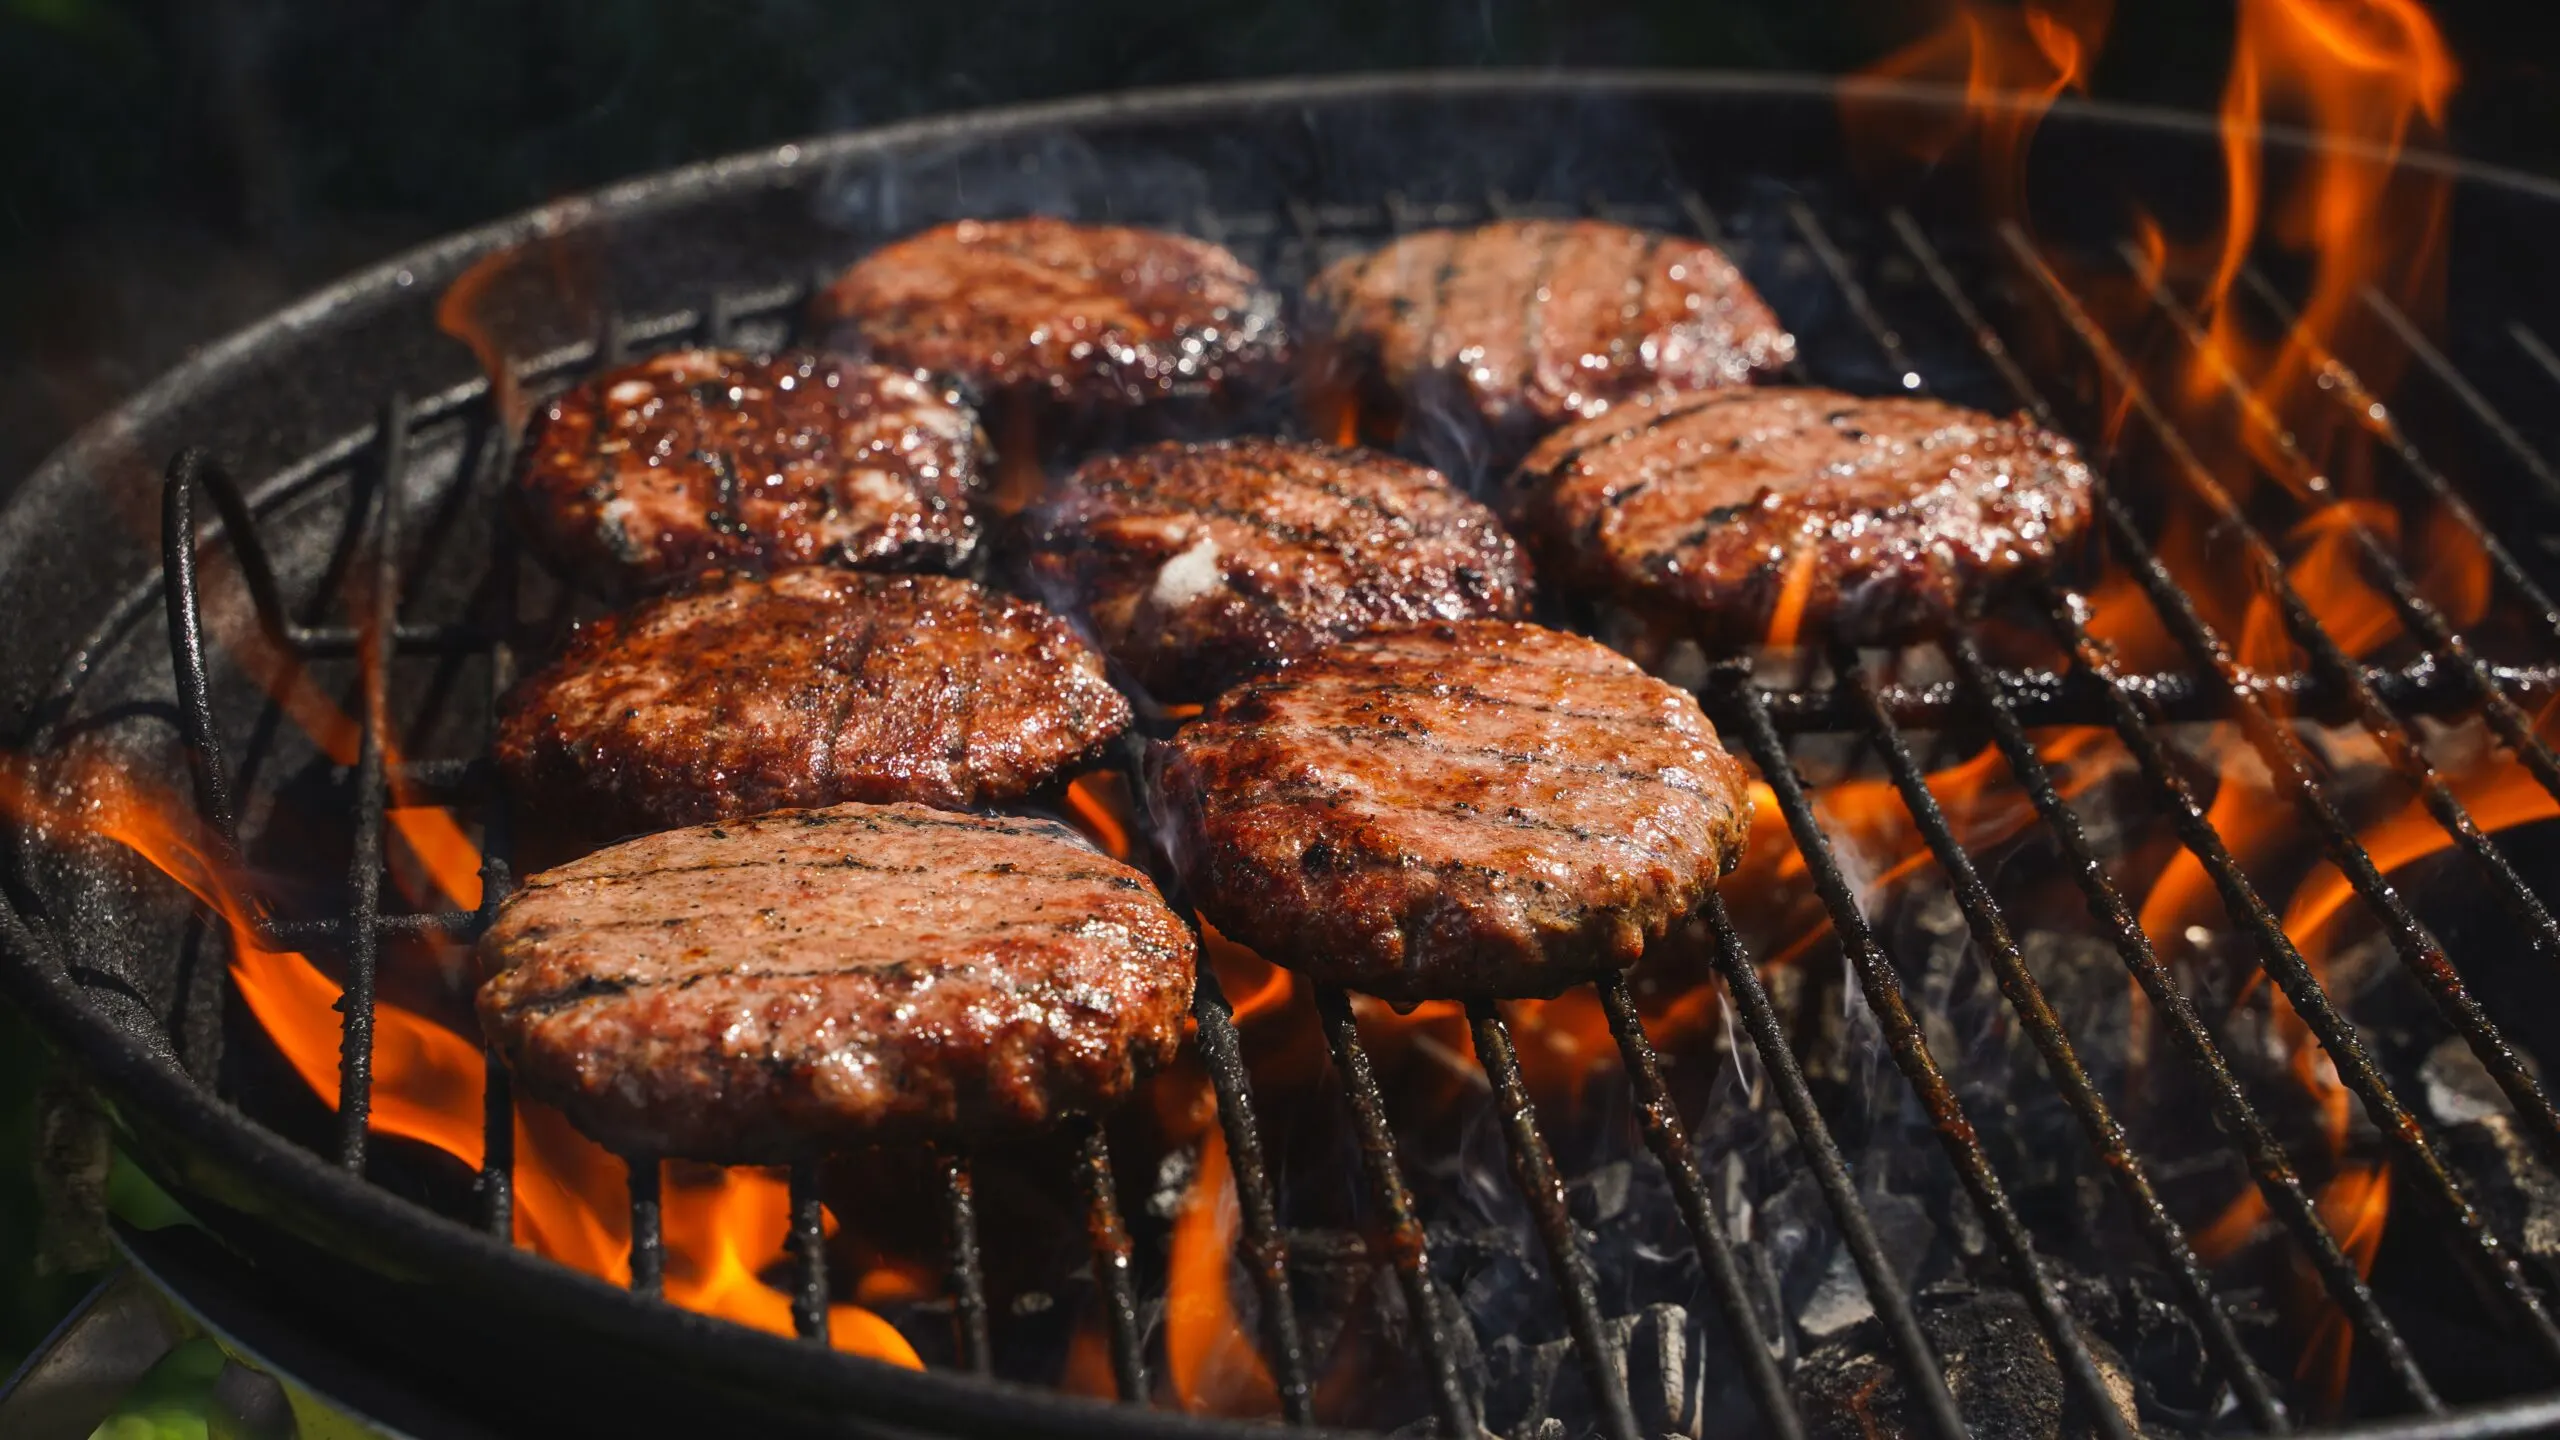 How Long to Cook Frozen Burgers on Grill